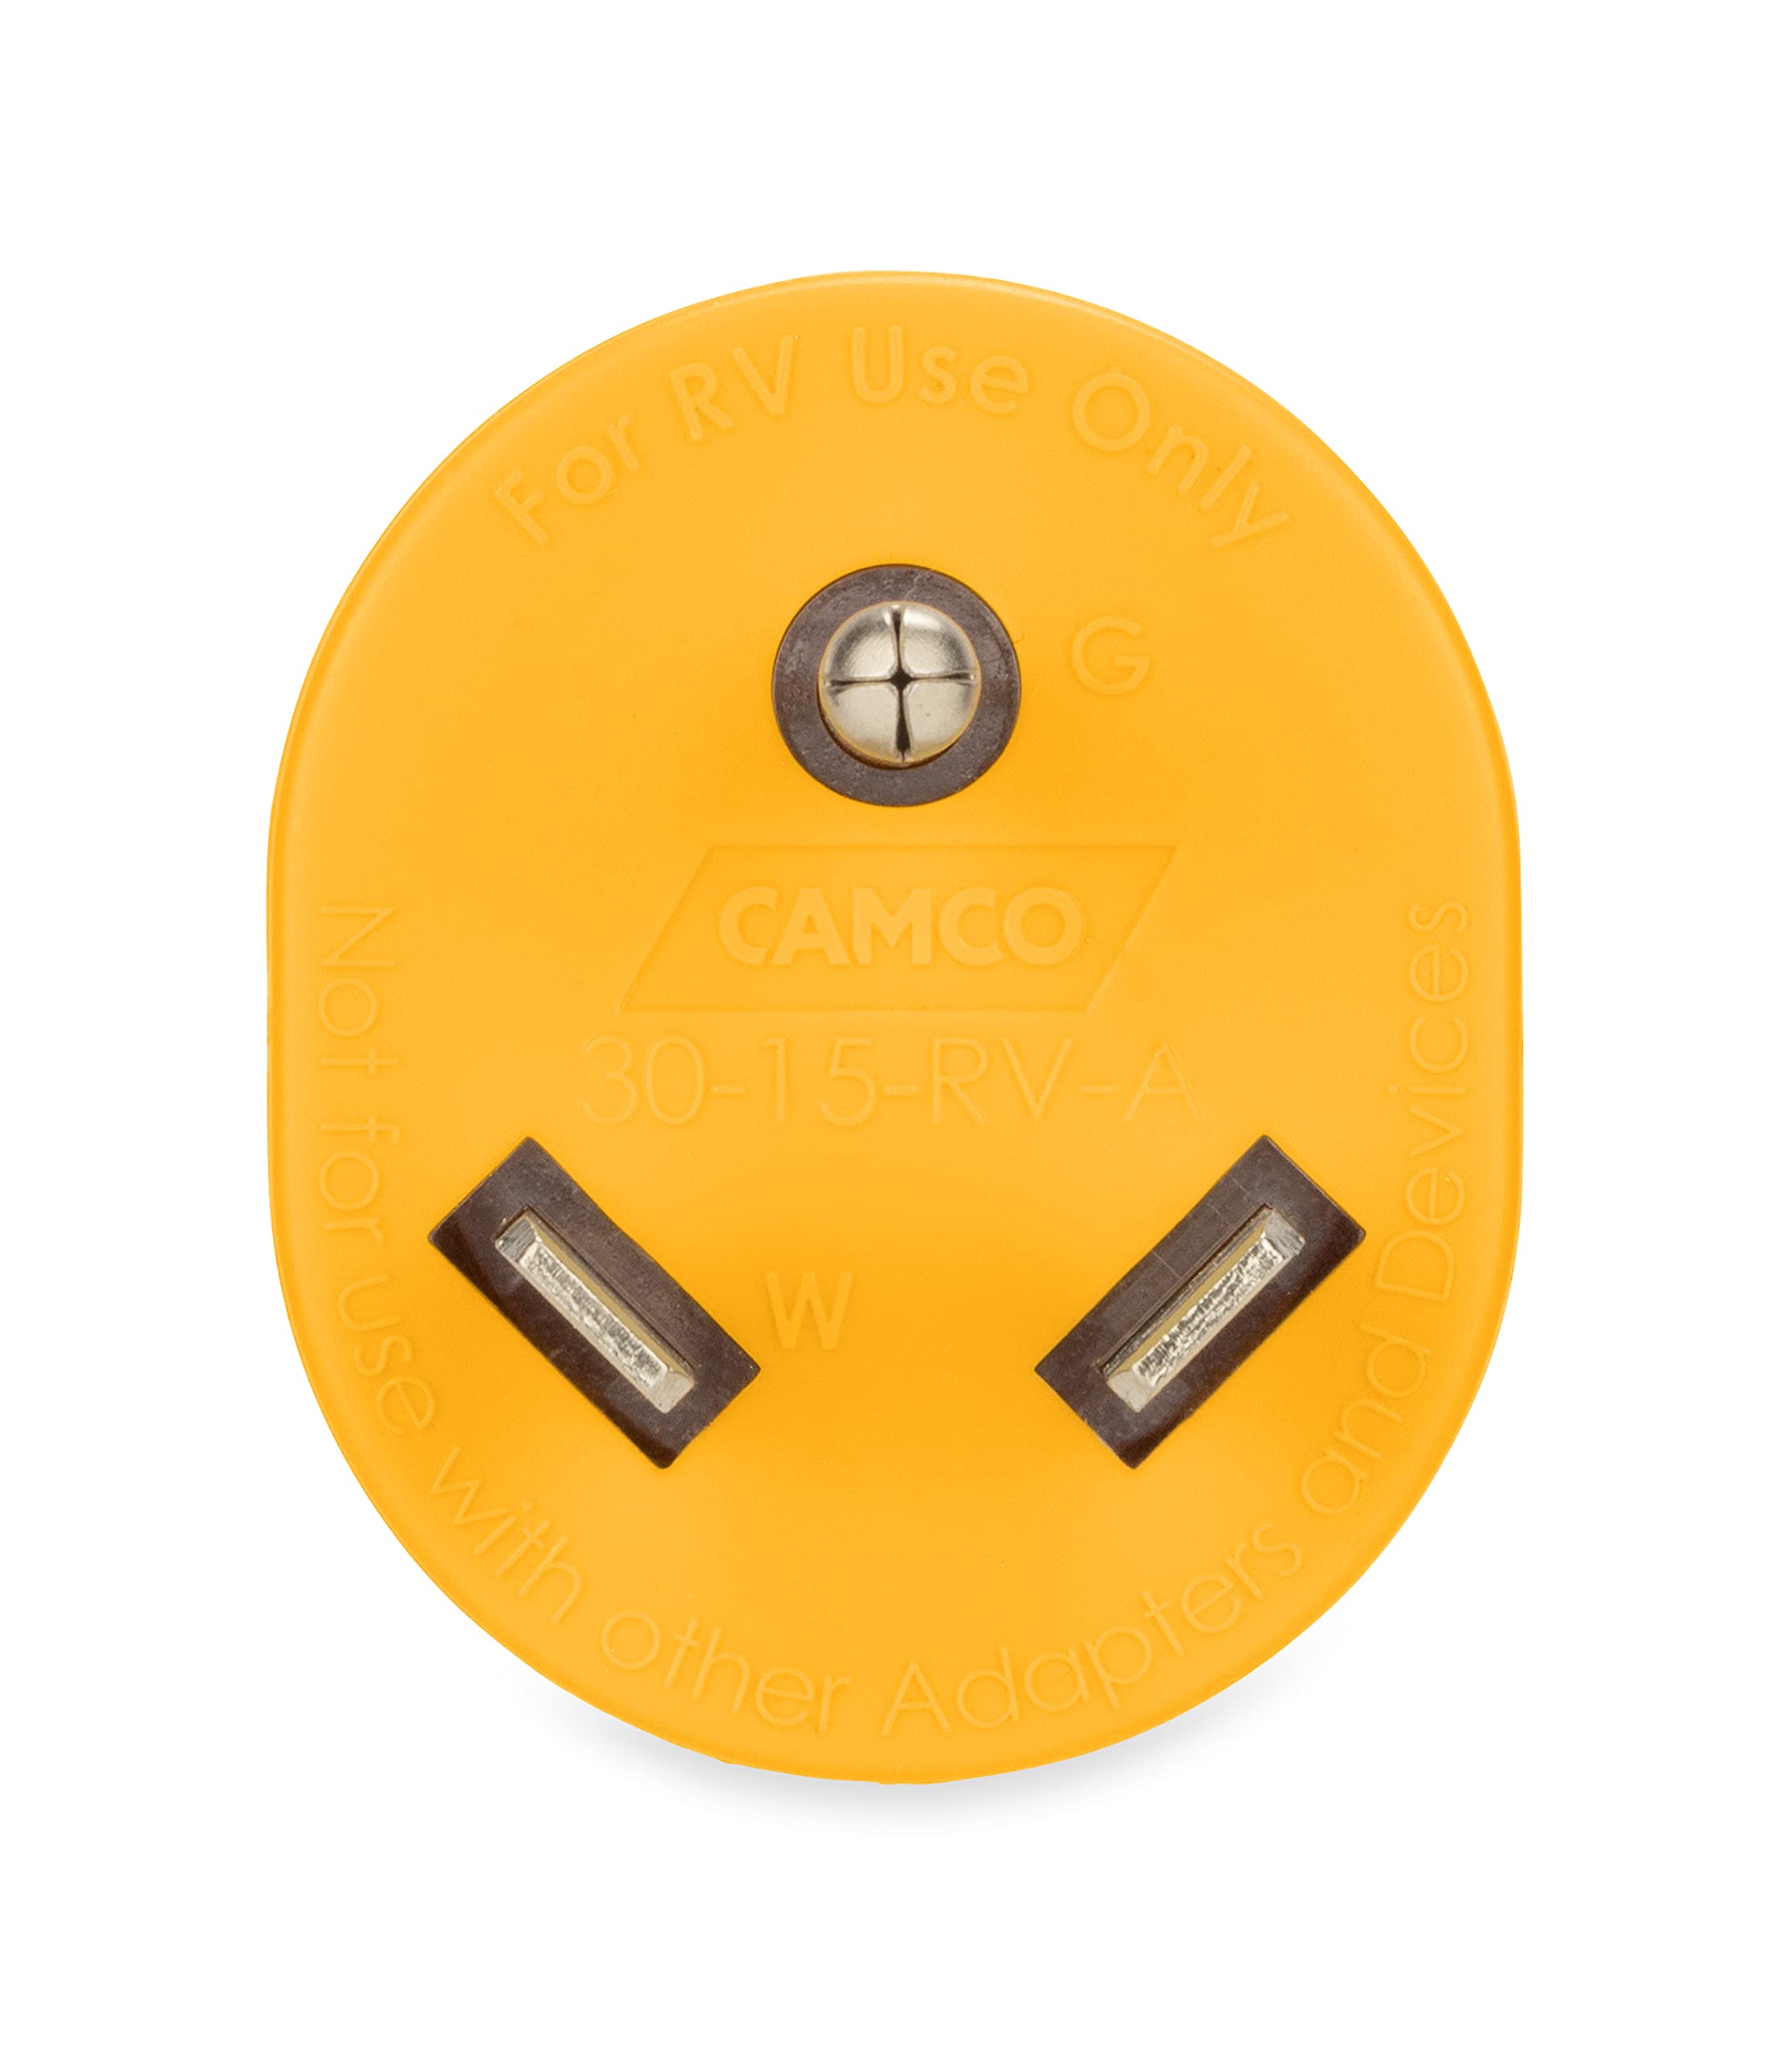 Camco Power Grip Camper/RV 30AM/15AF Electrical Adapter | Easy Connection of Standard 30-Amp Power Pedestals to Fit a Standard Residential Plug | Allows for Easy Outlet Removal (55233),Yellow|Yellow